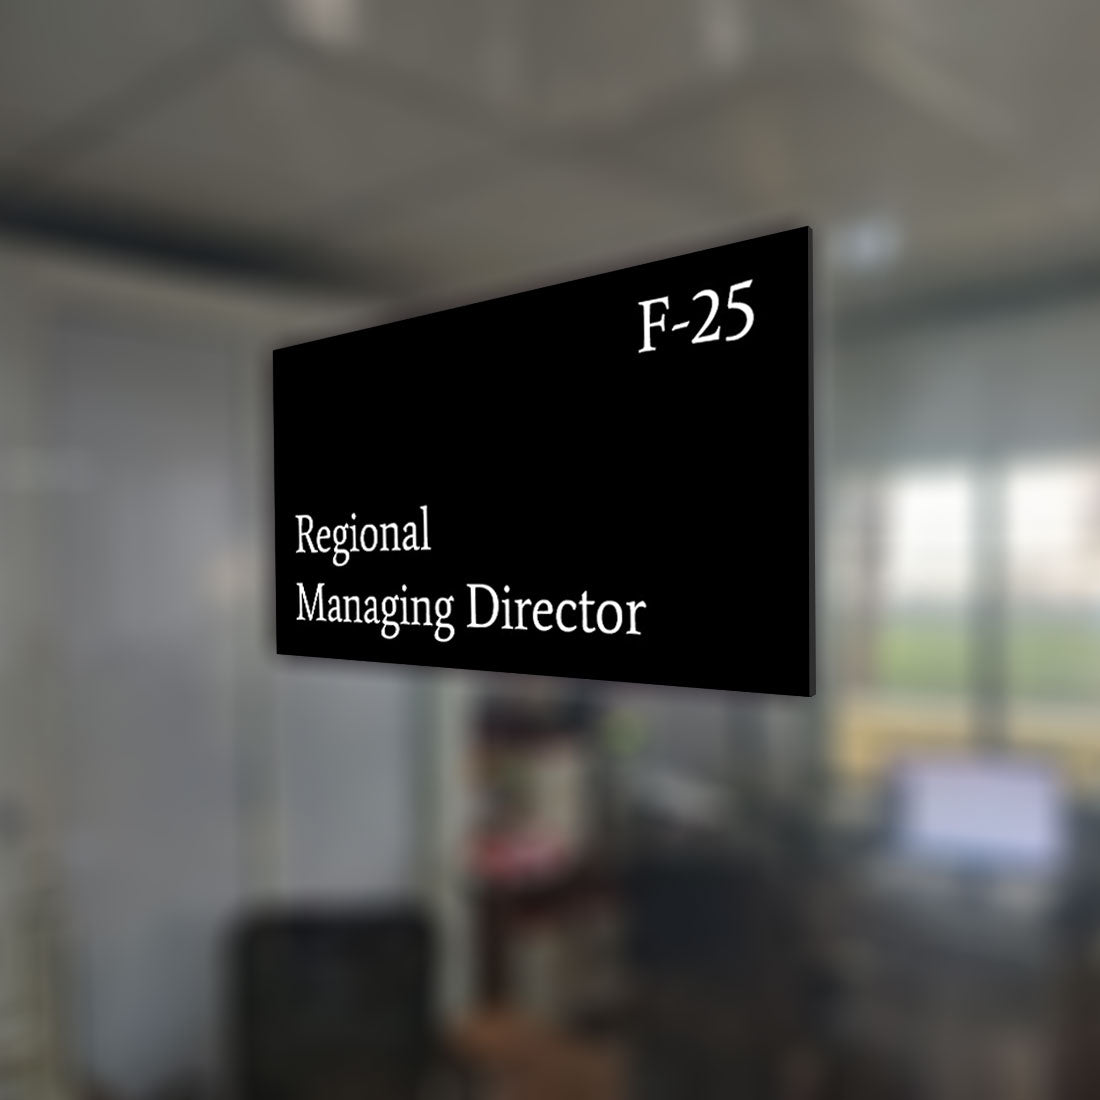 Personalized Name Plate Design for Office Customized Plaque - Director